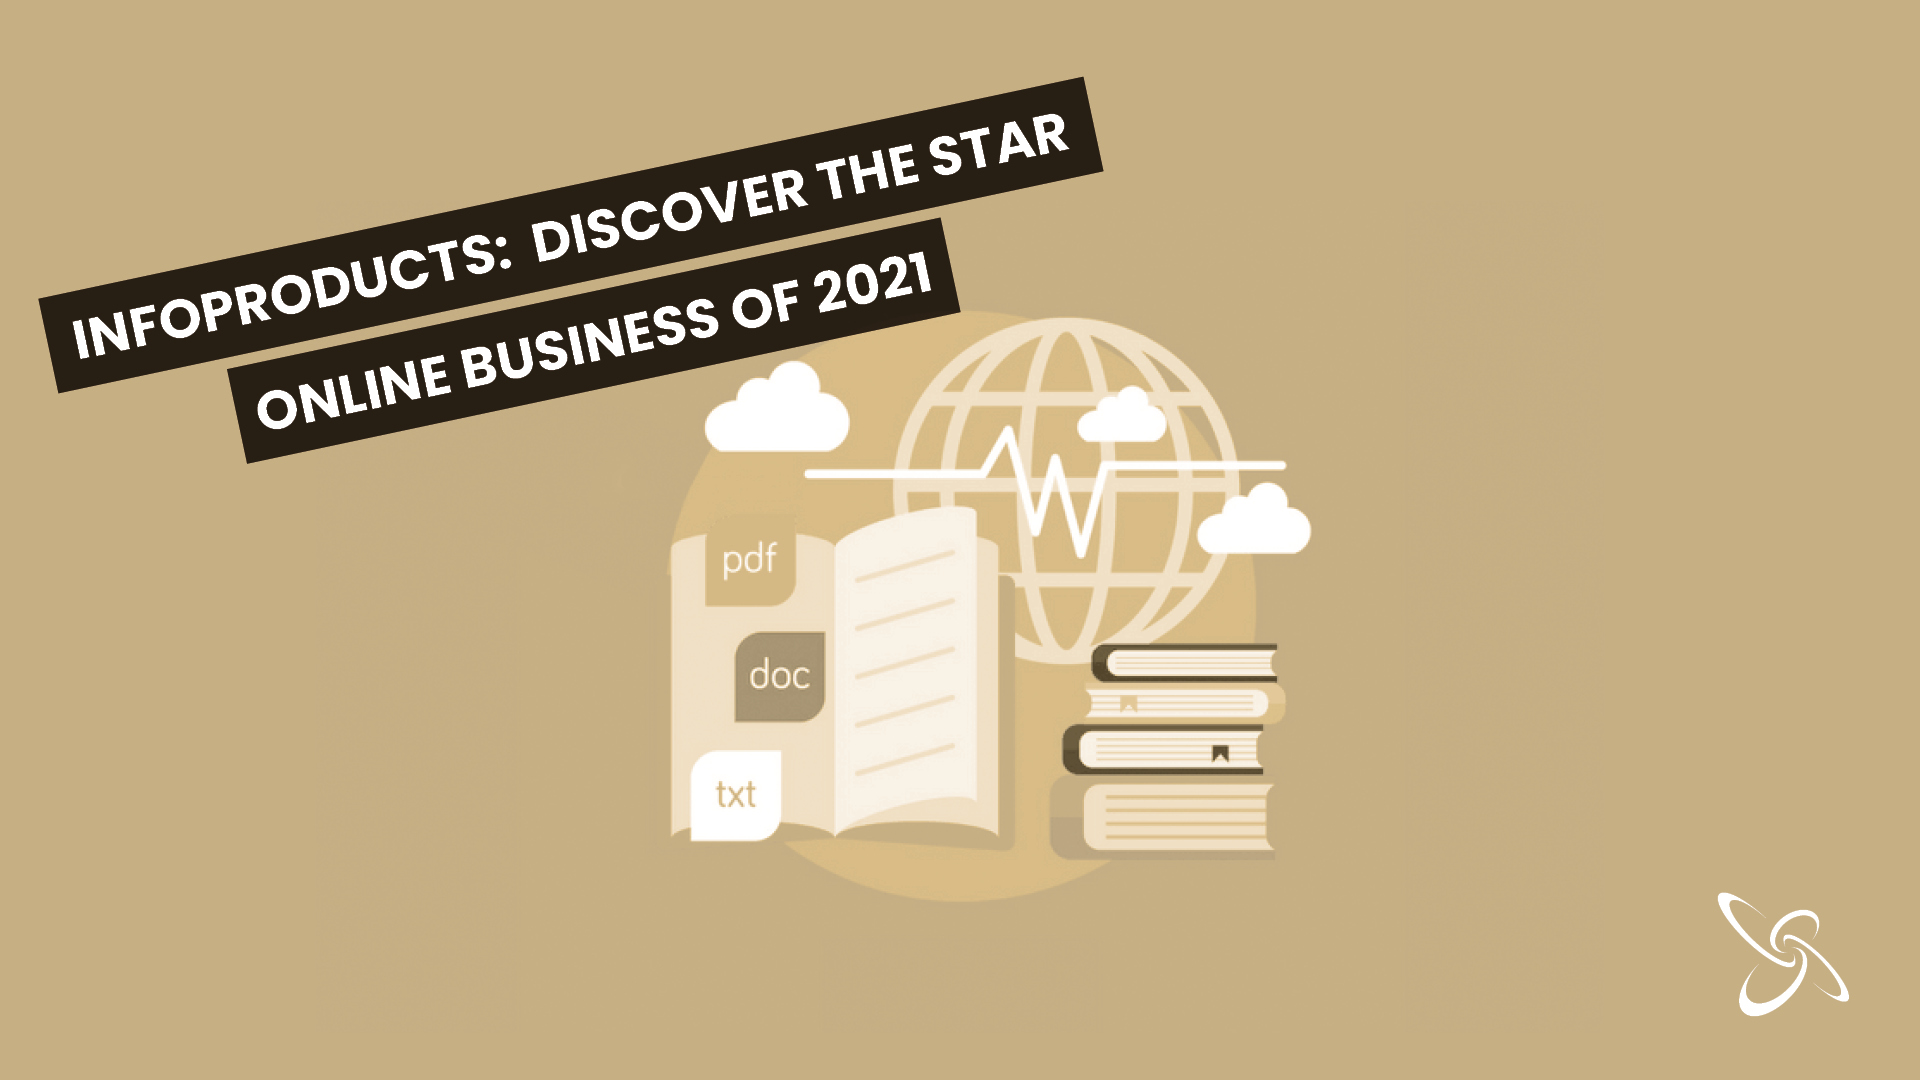 Infoproducts: discover the star online business of 2021